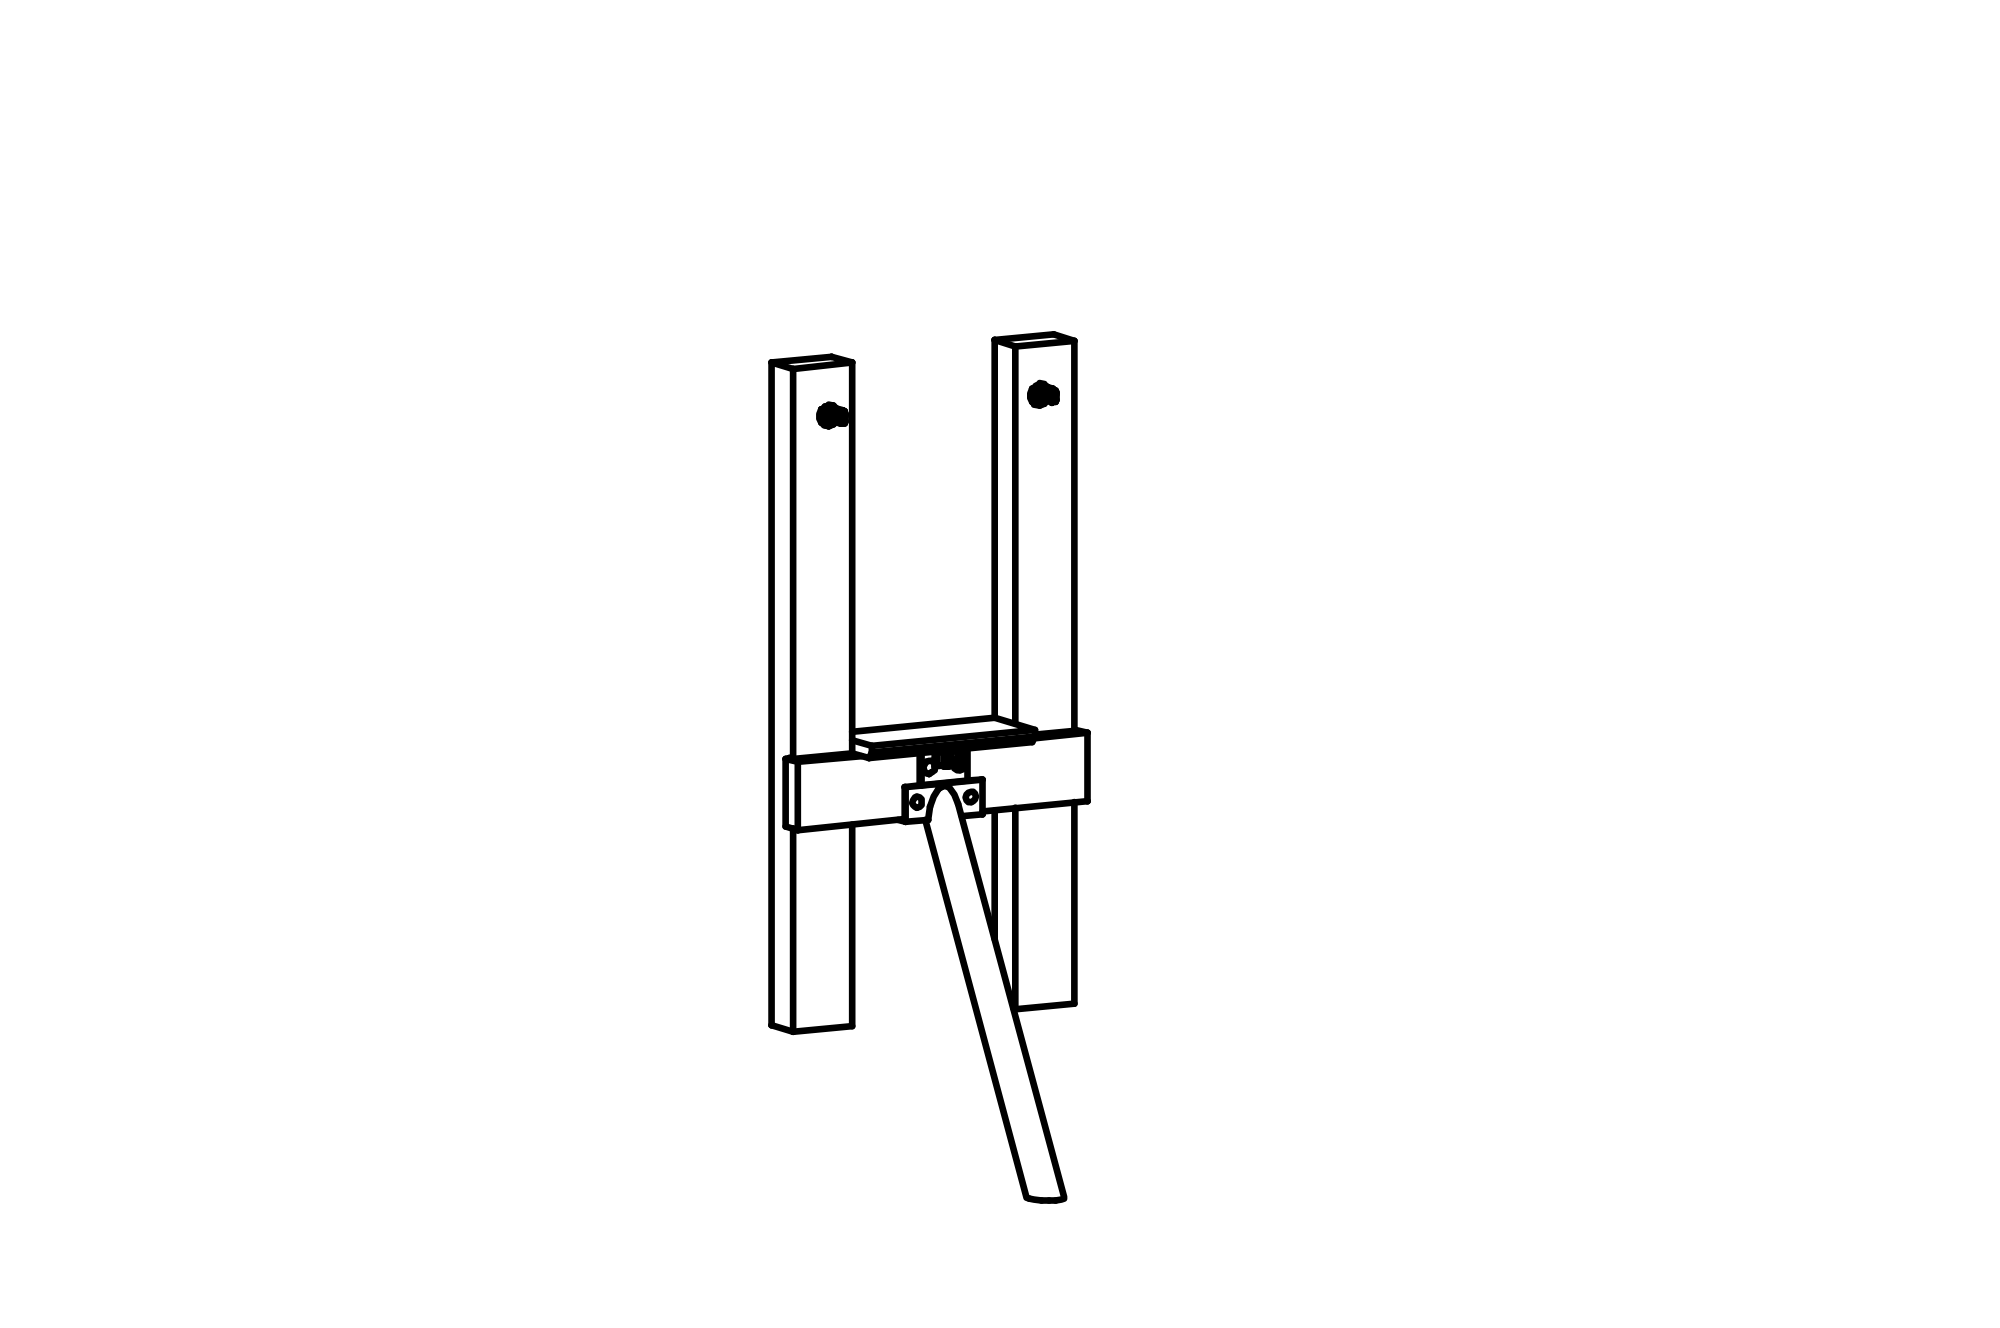 Support Frame, height = 1 m